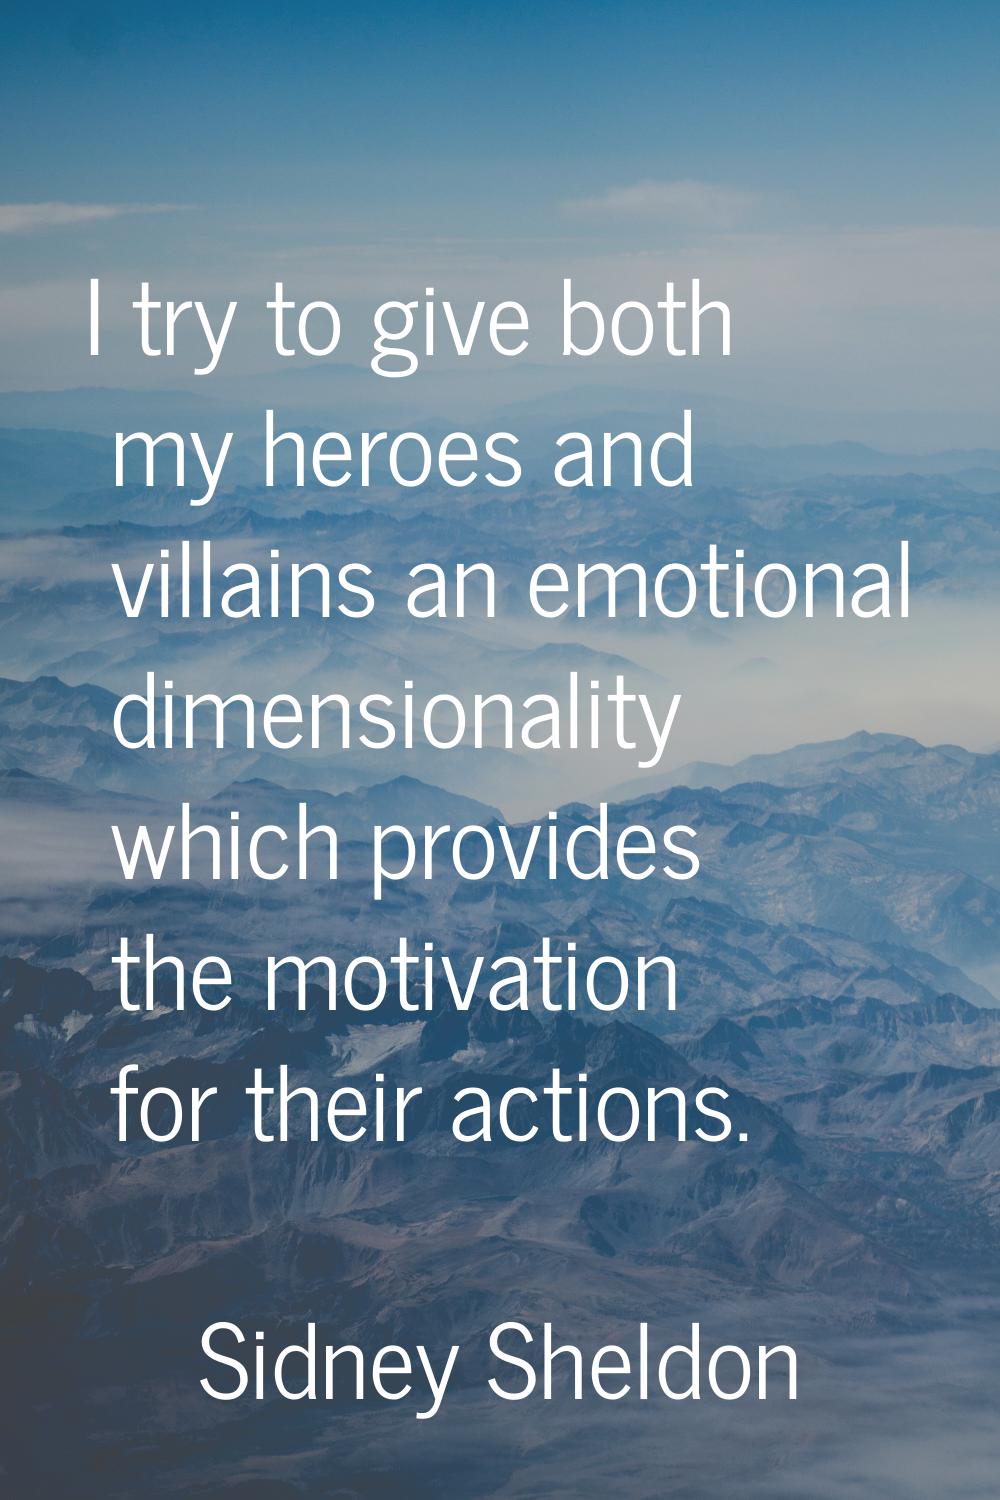 I try to give both my heroes and villains an emotional dimensionality which provides the motivation